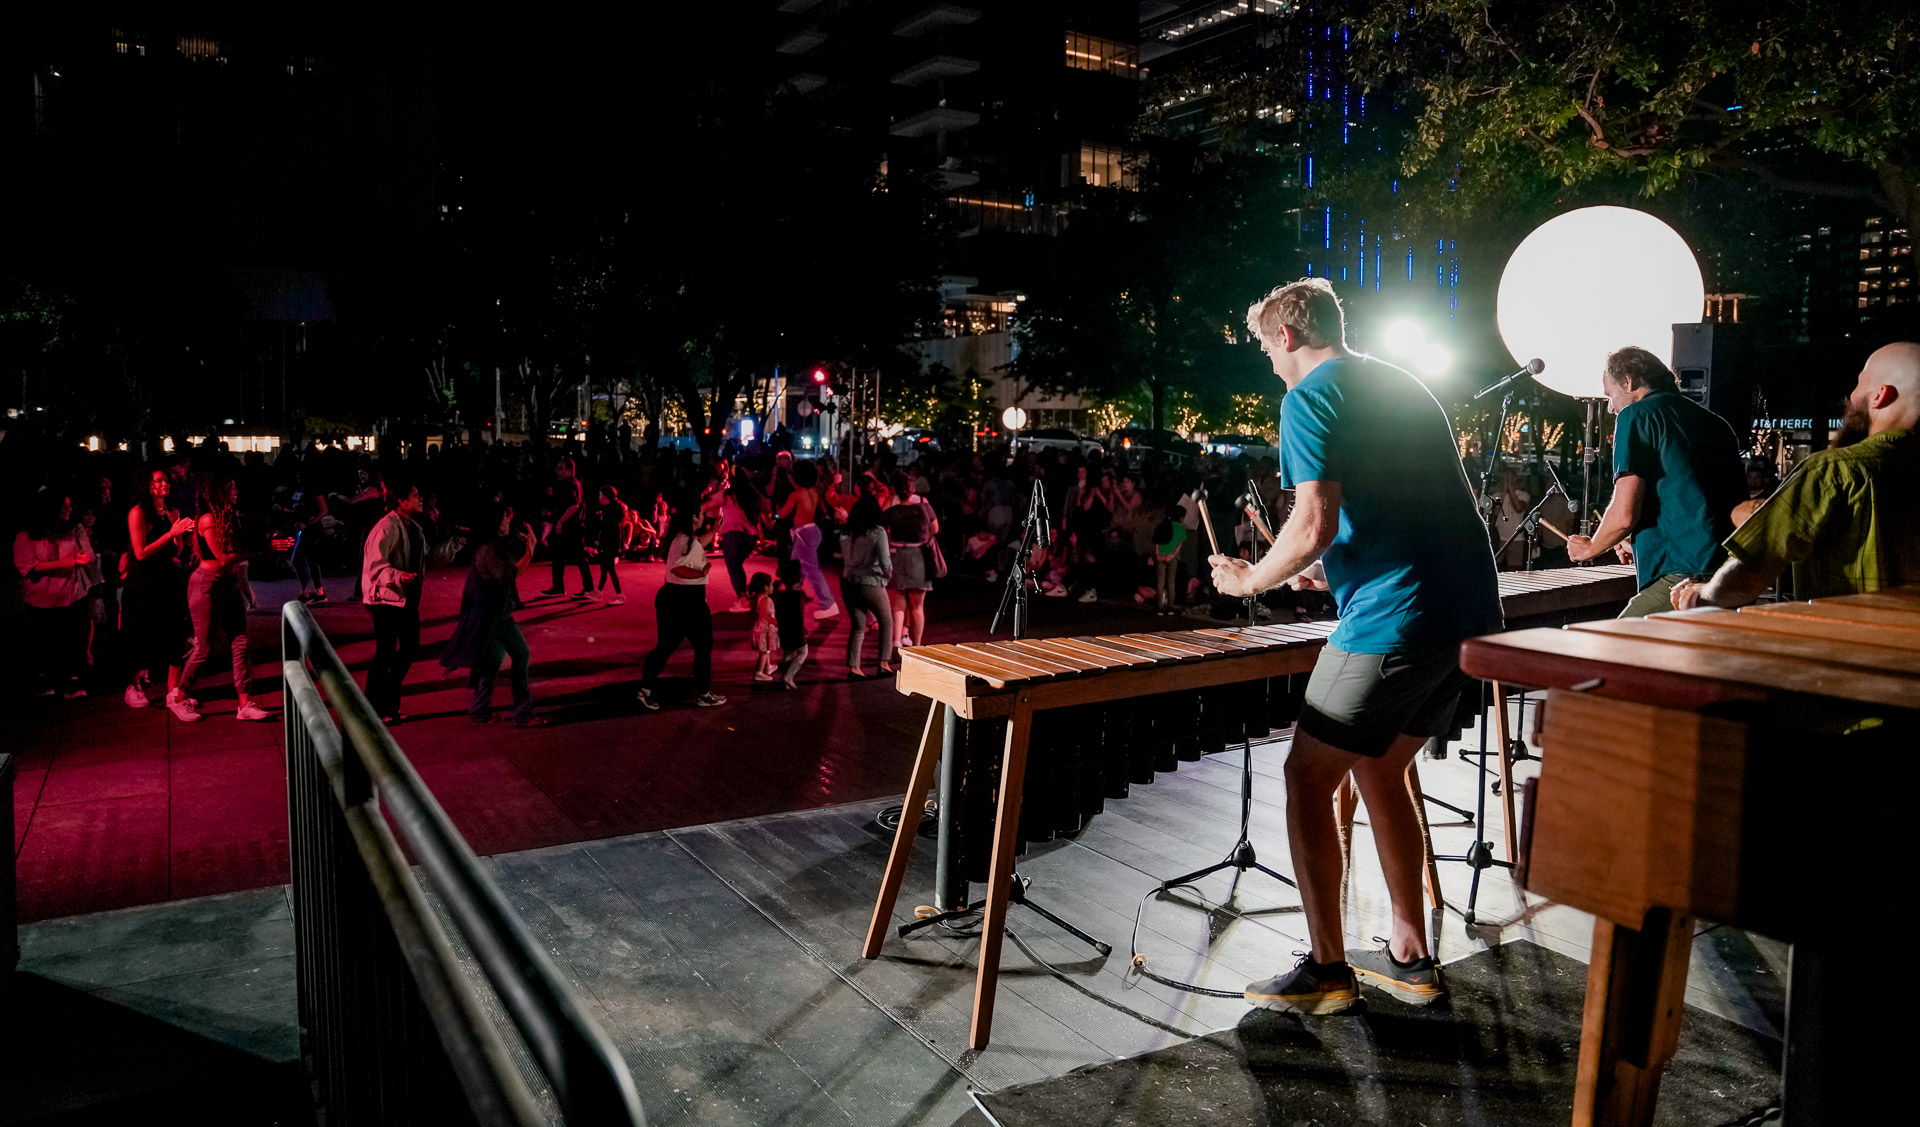 People playing marimbas in front of a crowd